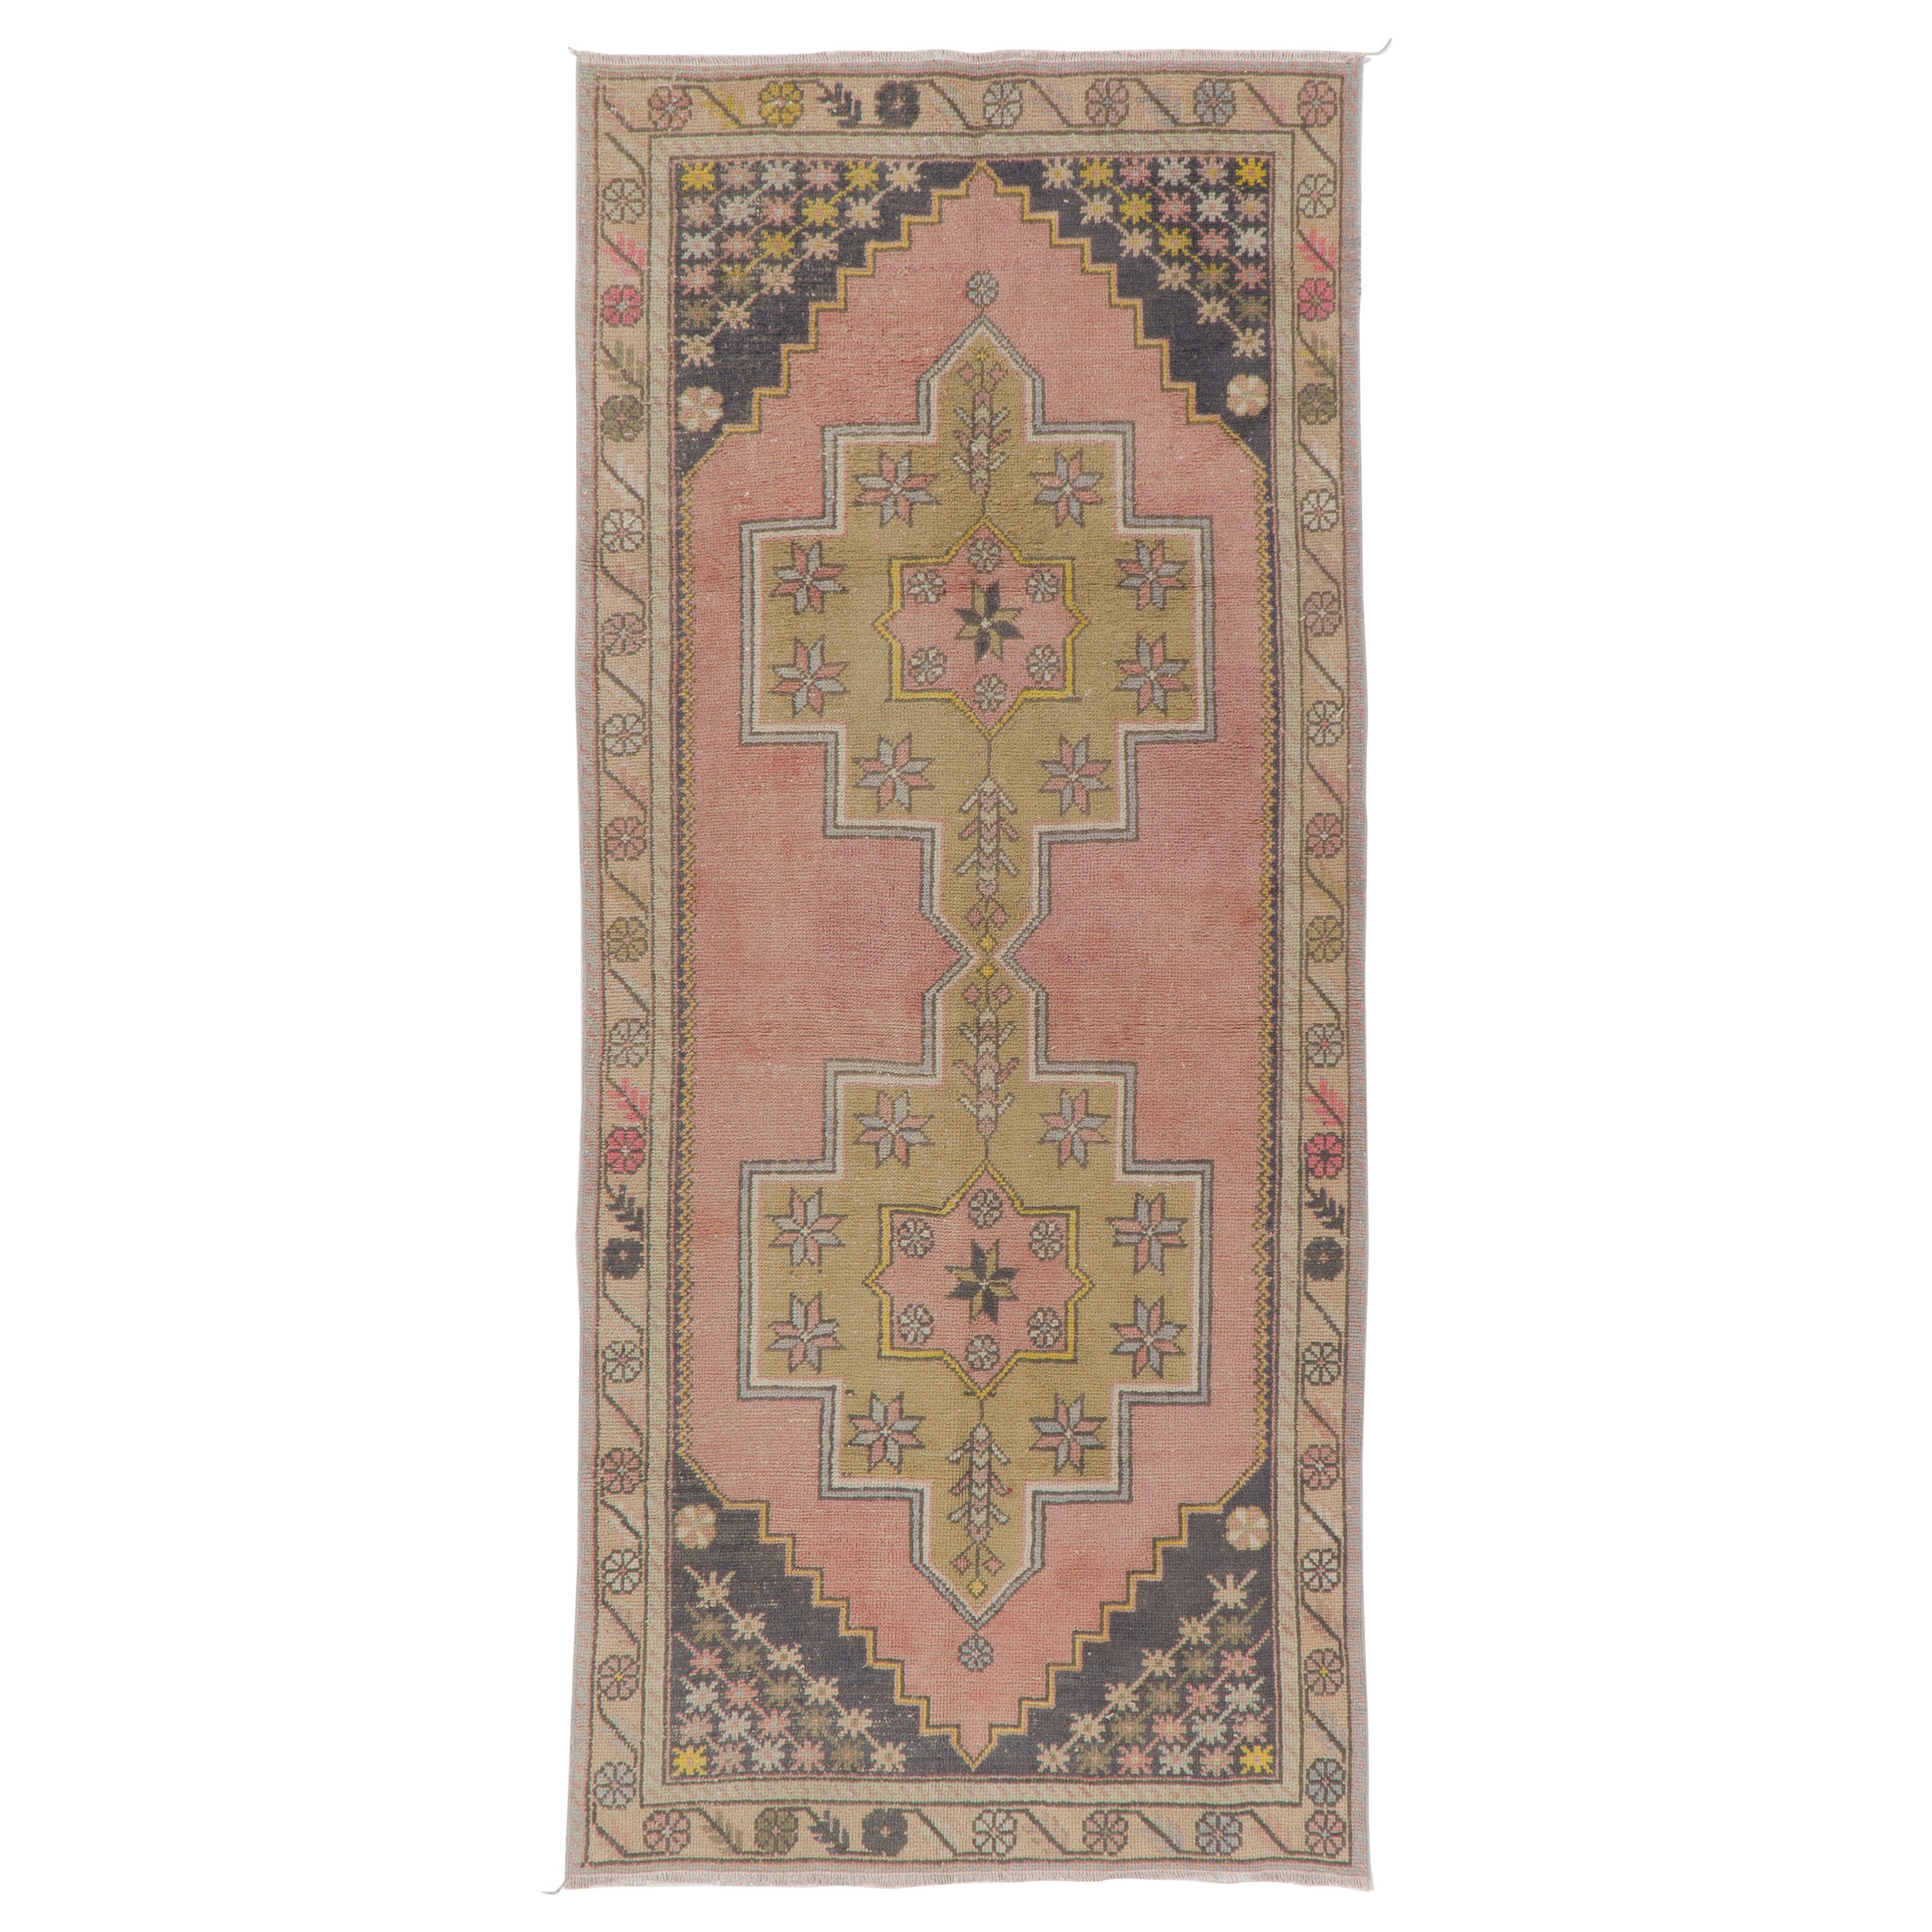 Vintage HandKnotted Wool Turkish Rug with Geometric Design in Muted Colors